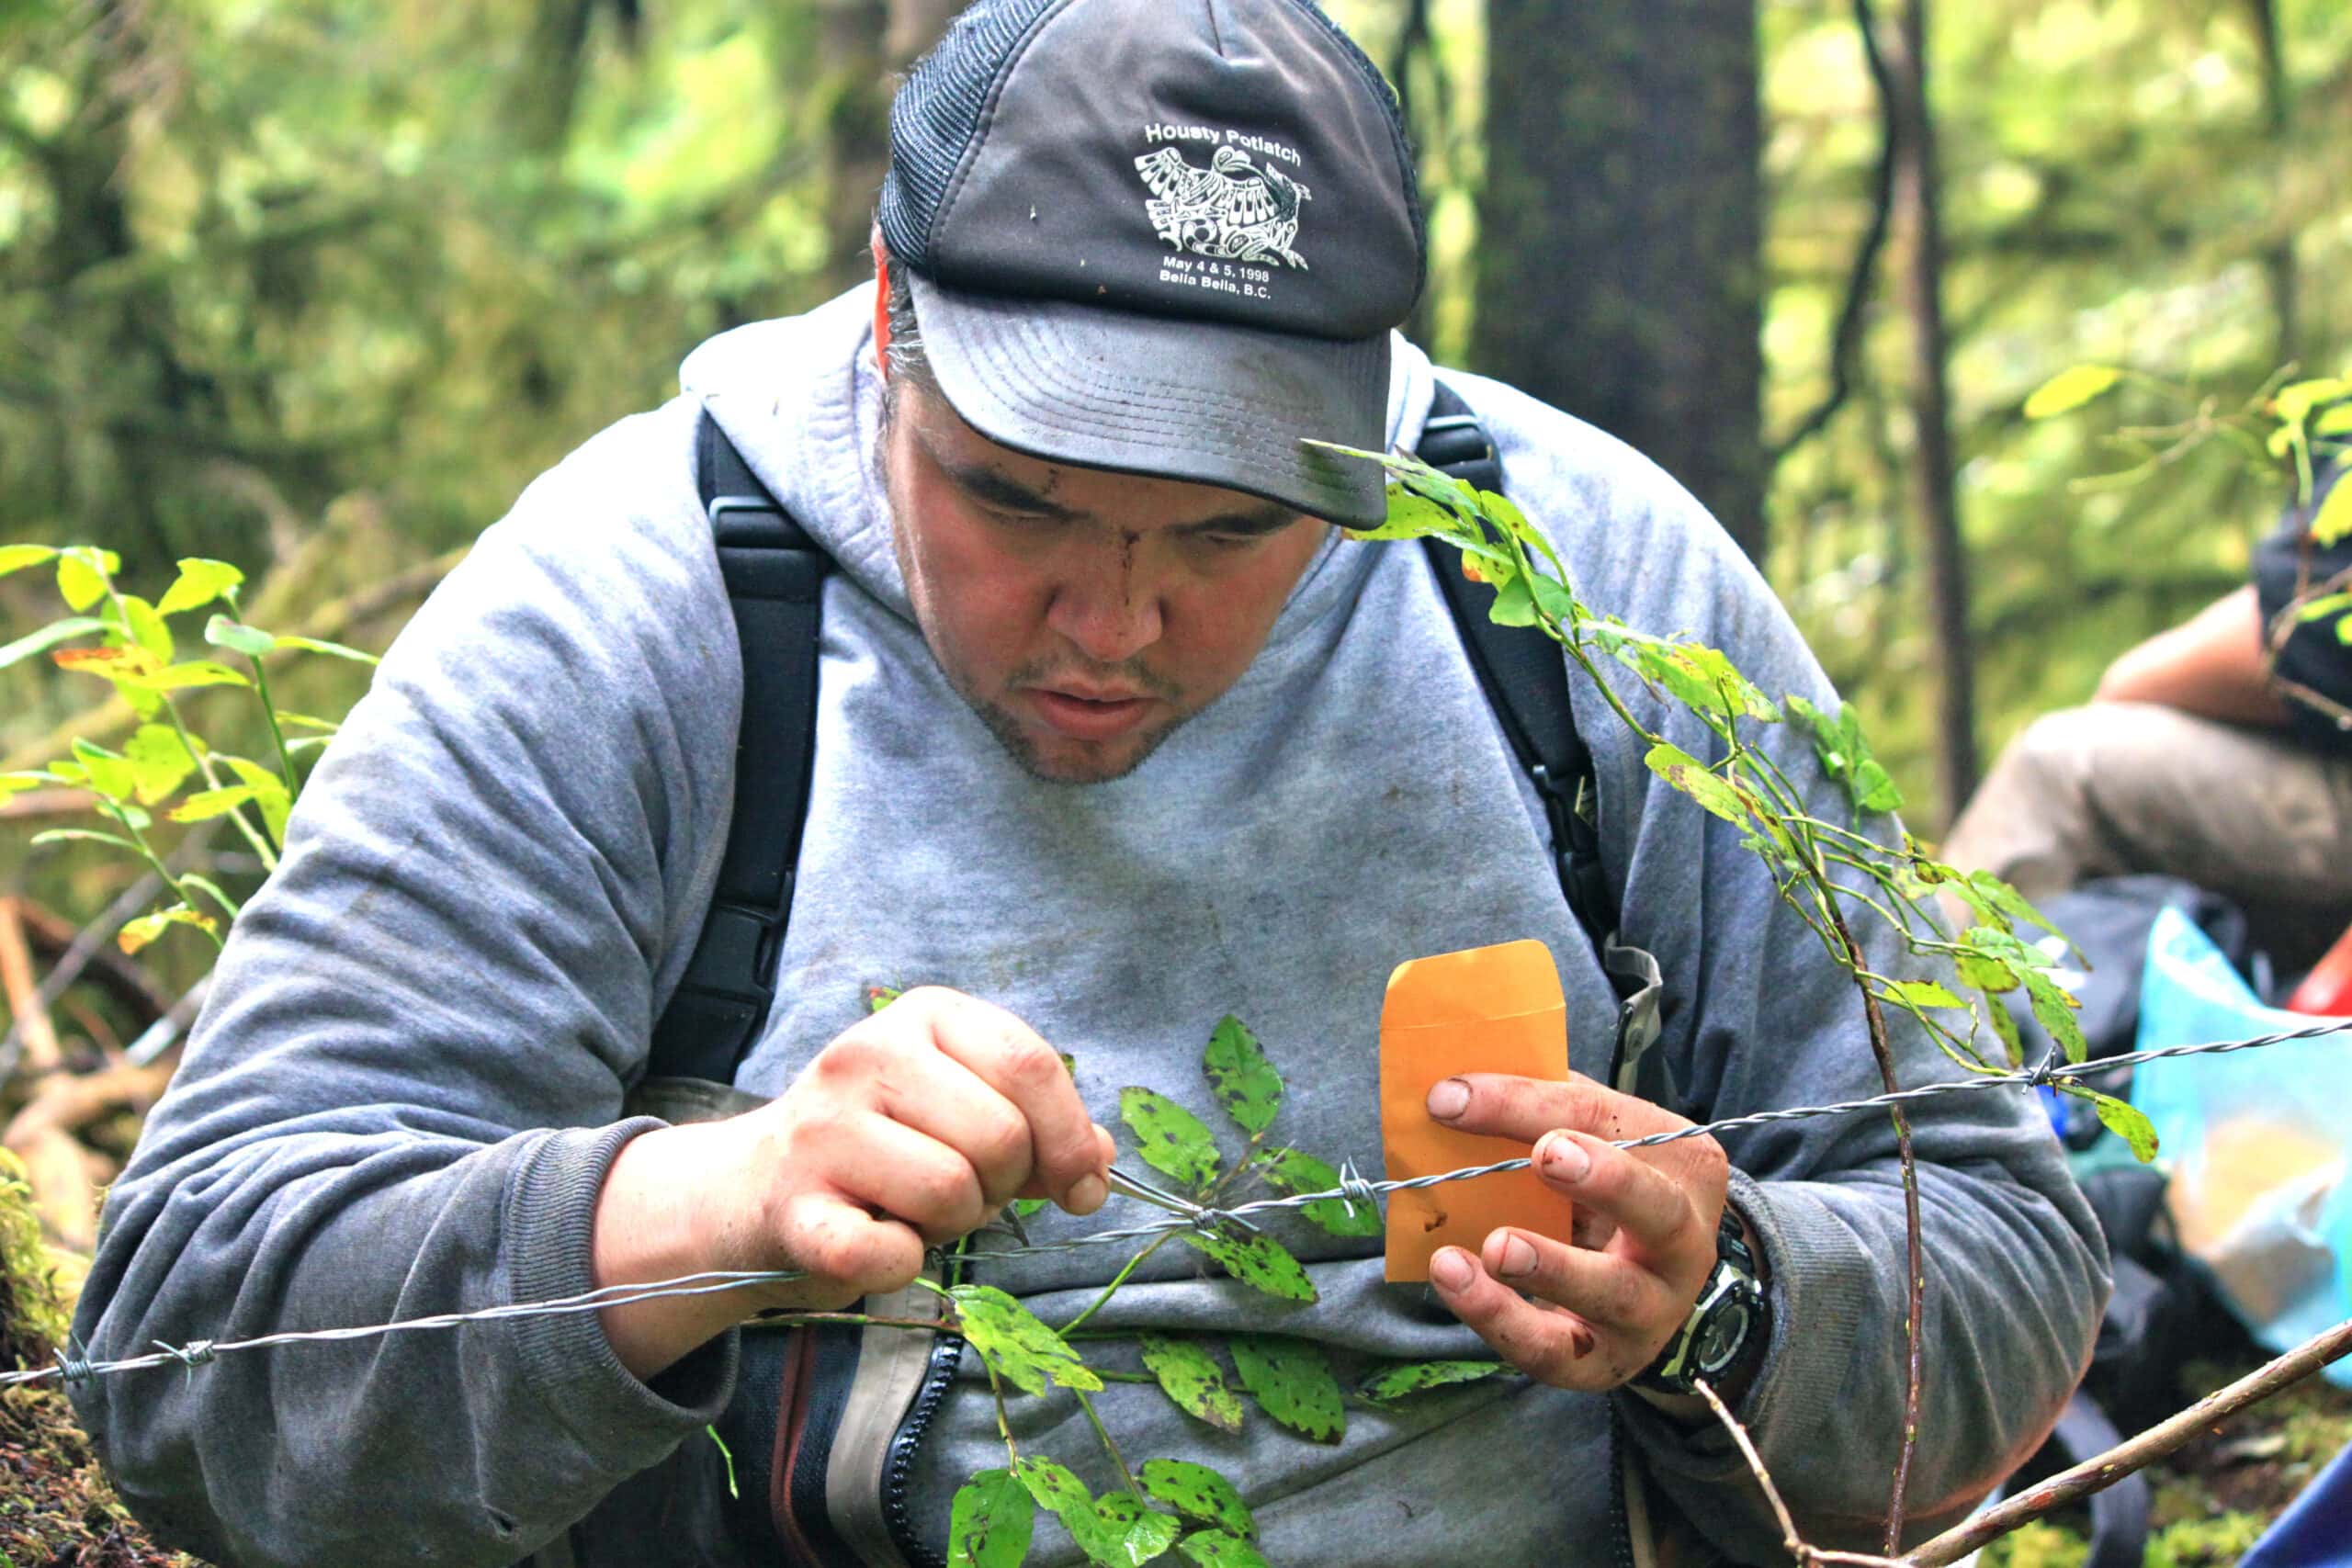 William Housty, conservation manager for Heiltsuk Integrated Resource Management Department, at a snare to collect grizzly bear hair for research in Haíɫzaqv territory. Photo: Morgan Hocking / Heiltsuk Nation.